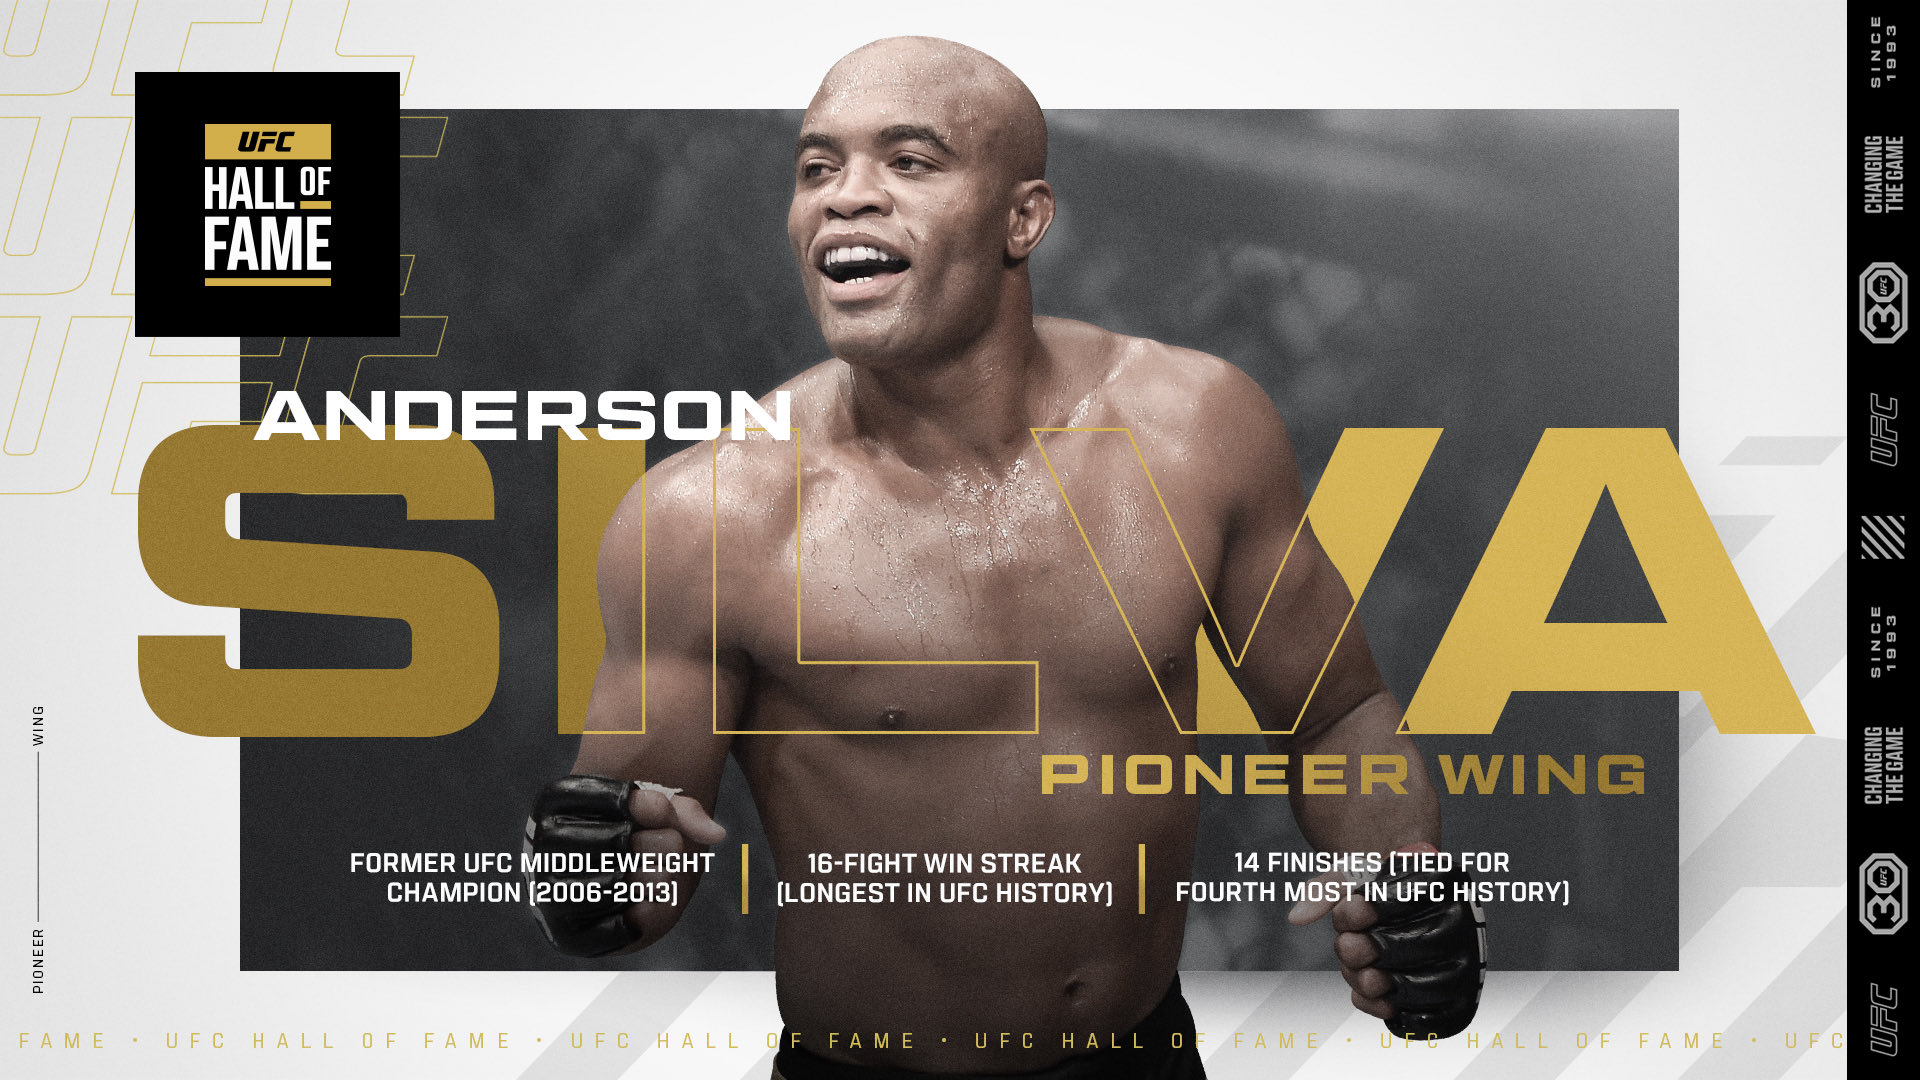 Anderson Silva added to the UFC Hall of Fame class